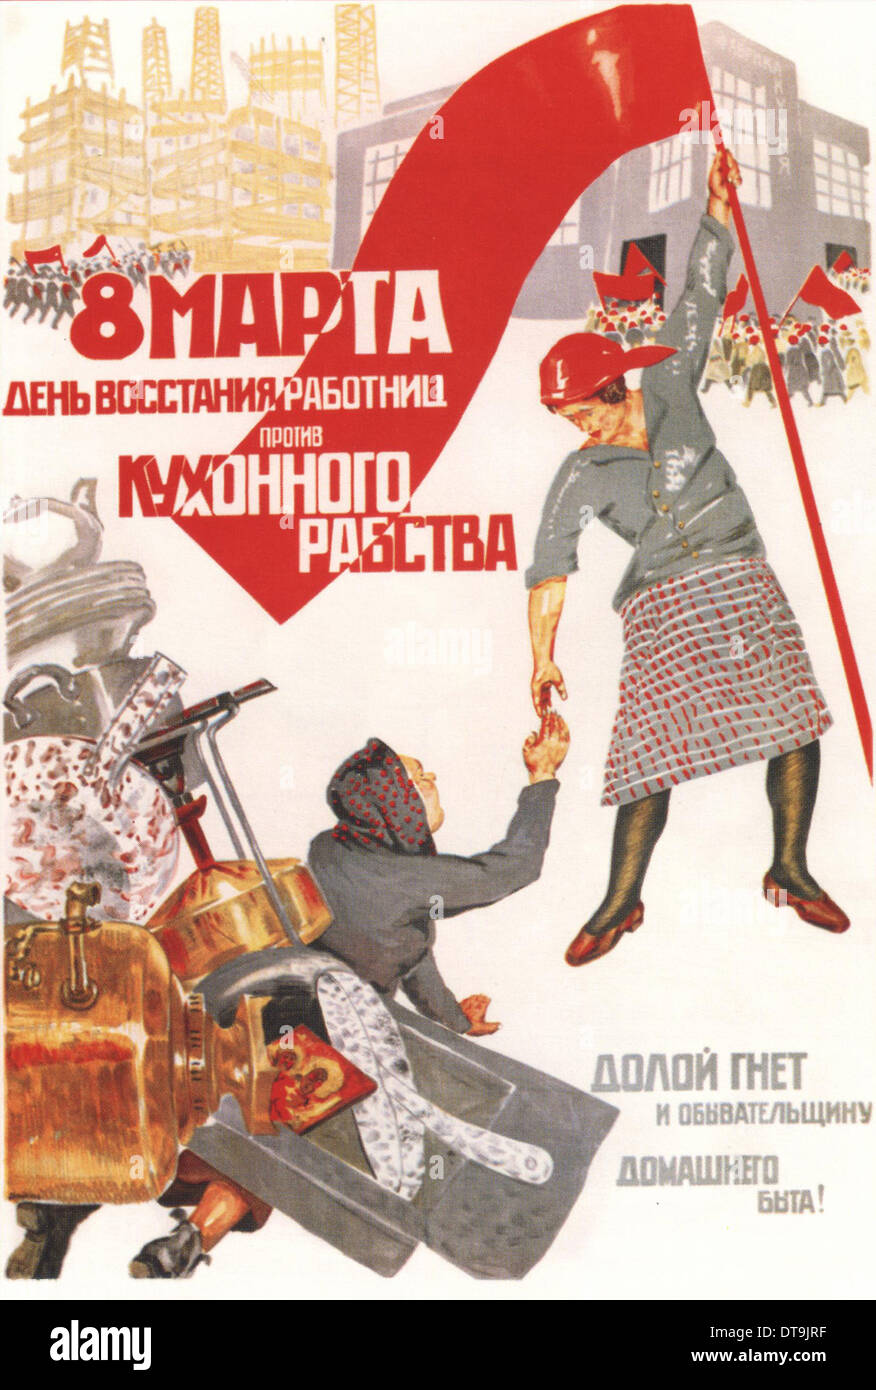 The 8th of March: A day of rebellion by working women against kitchen slavery. Down with the vacuity Artist: Deykin, Boris Nikolayevich (1890-1945) Stock Photo